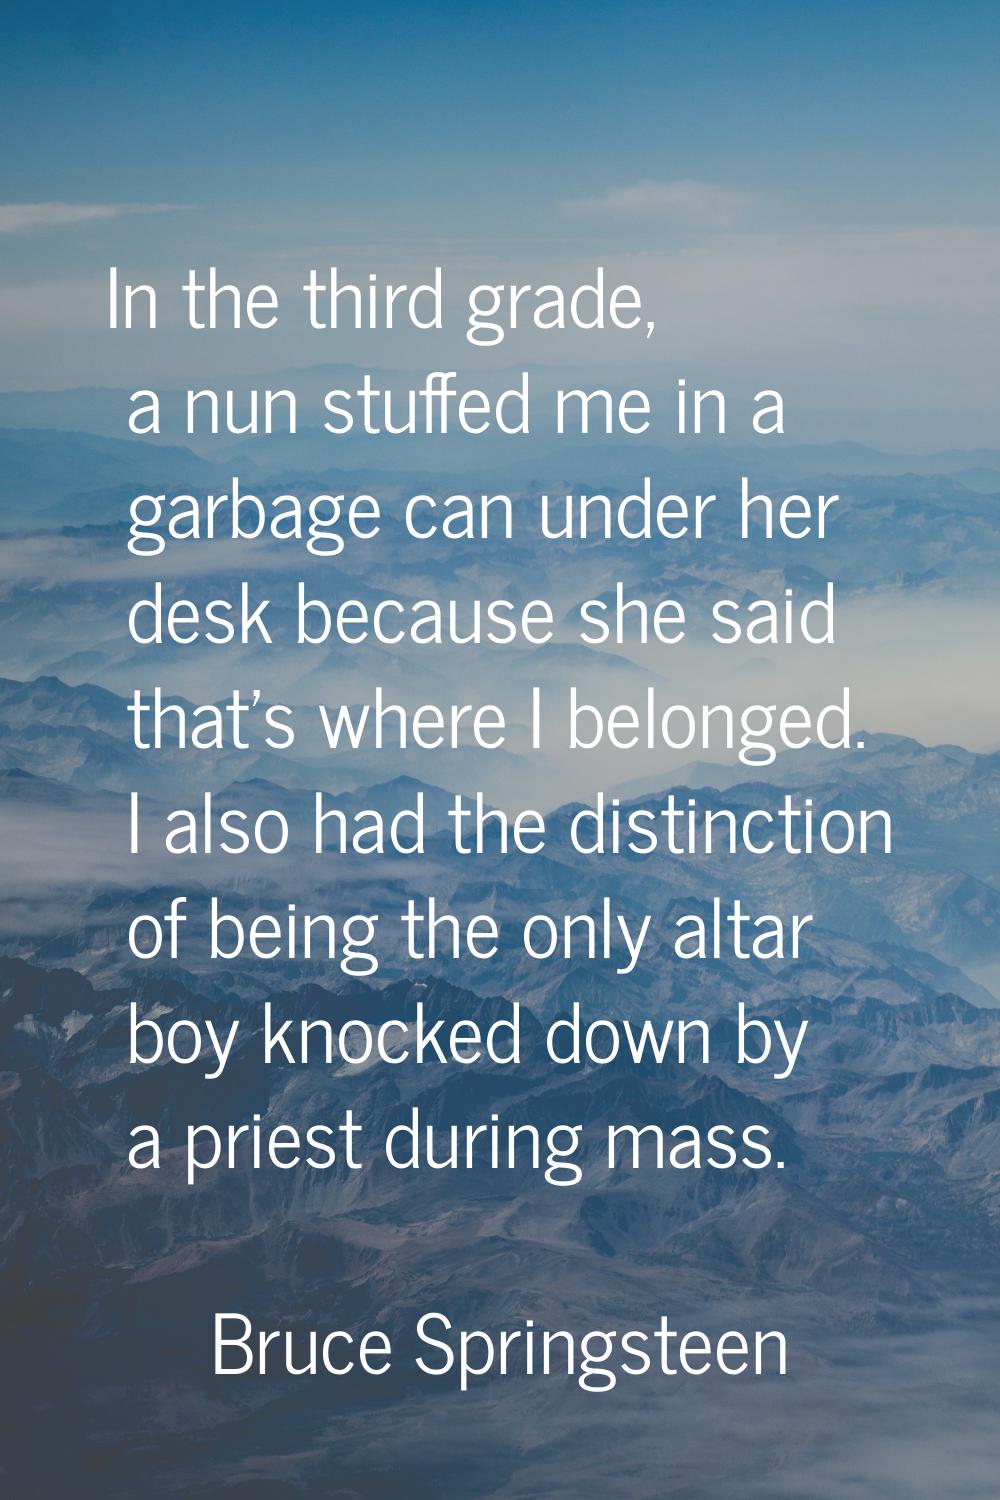 In the third grade, a nun stuffed me in a garbage can under her desk because she said that's where 